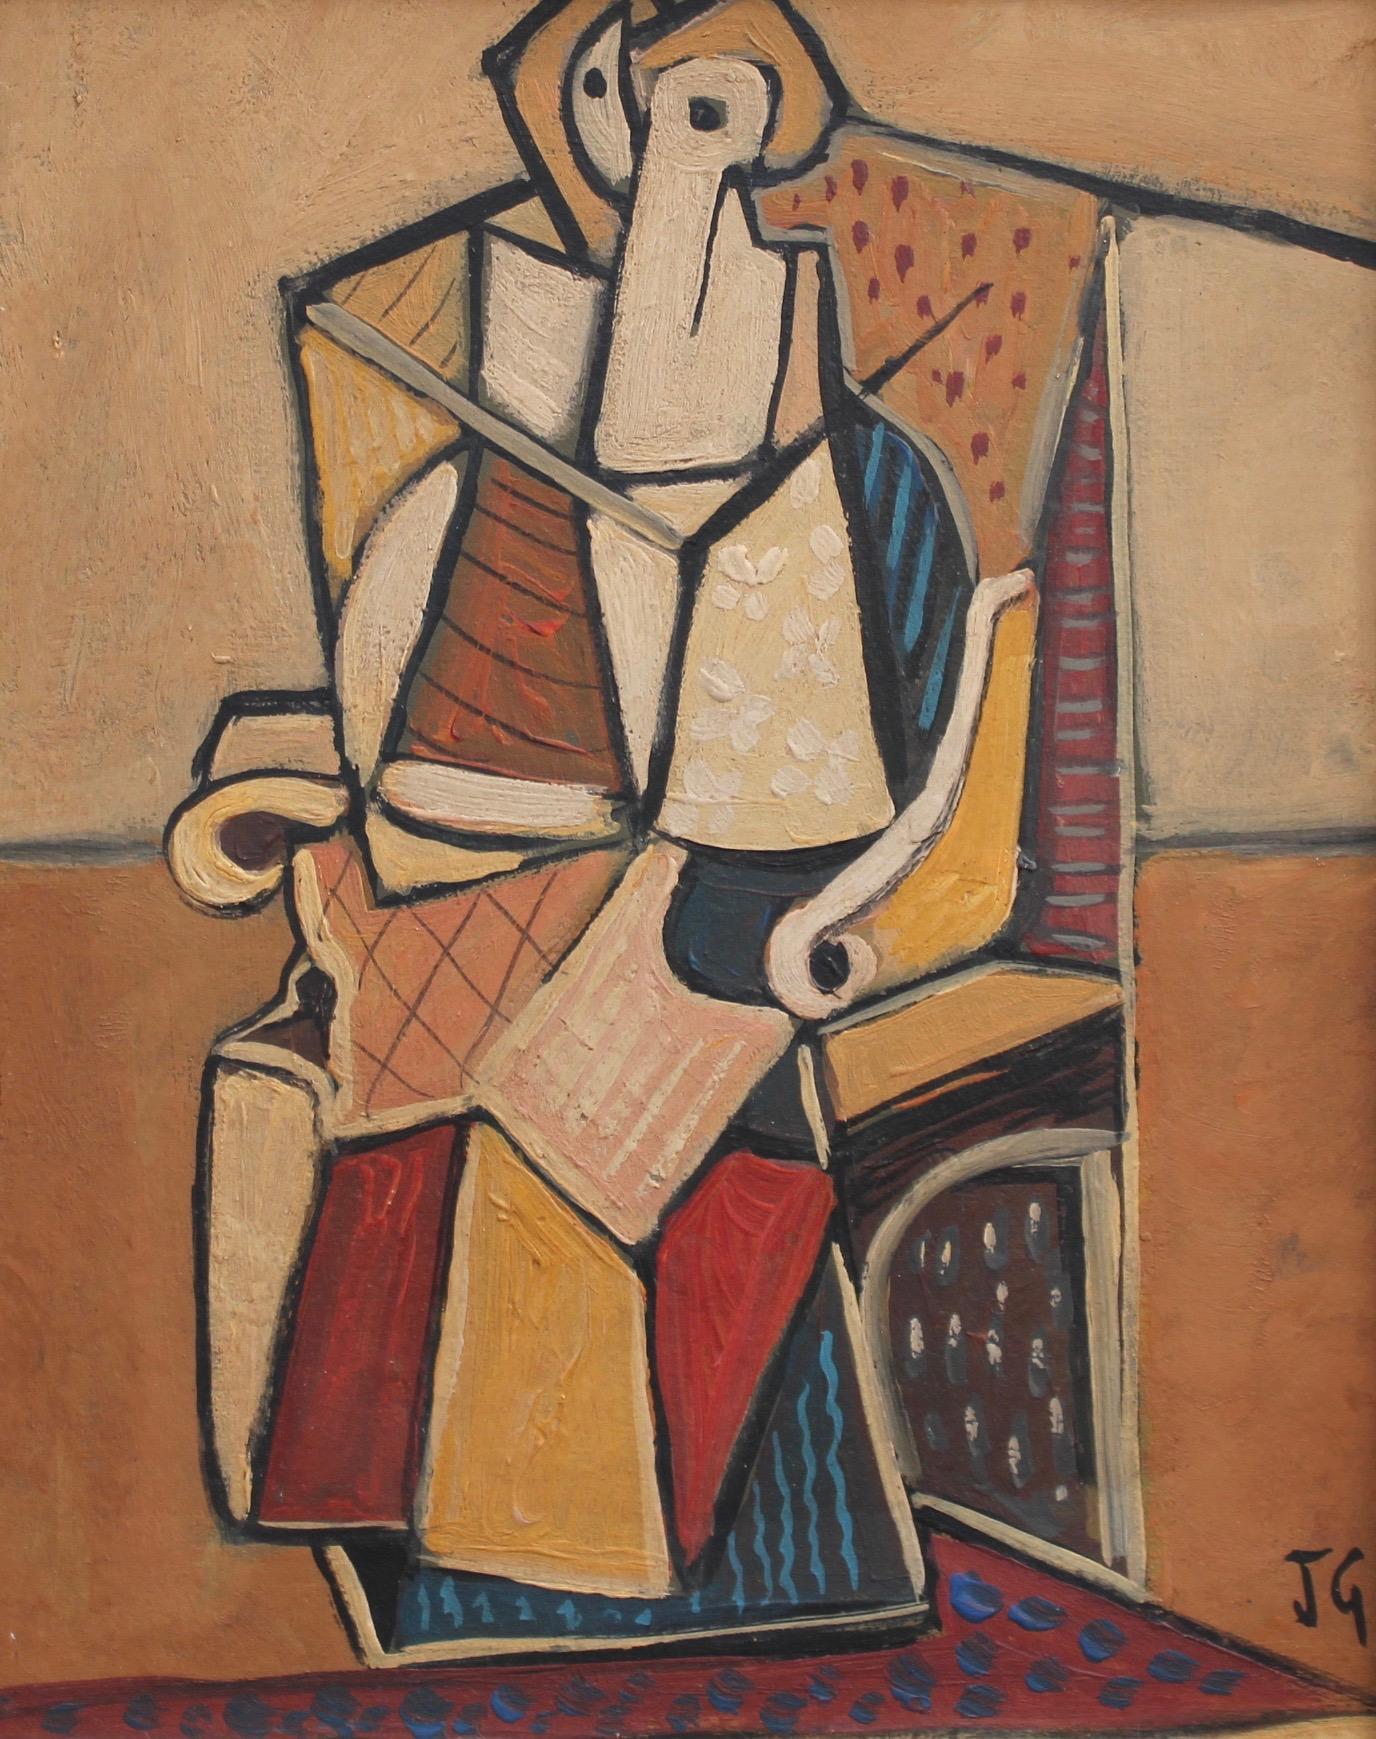 J.G. Abstract Painting - Seated Abstract Figure